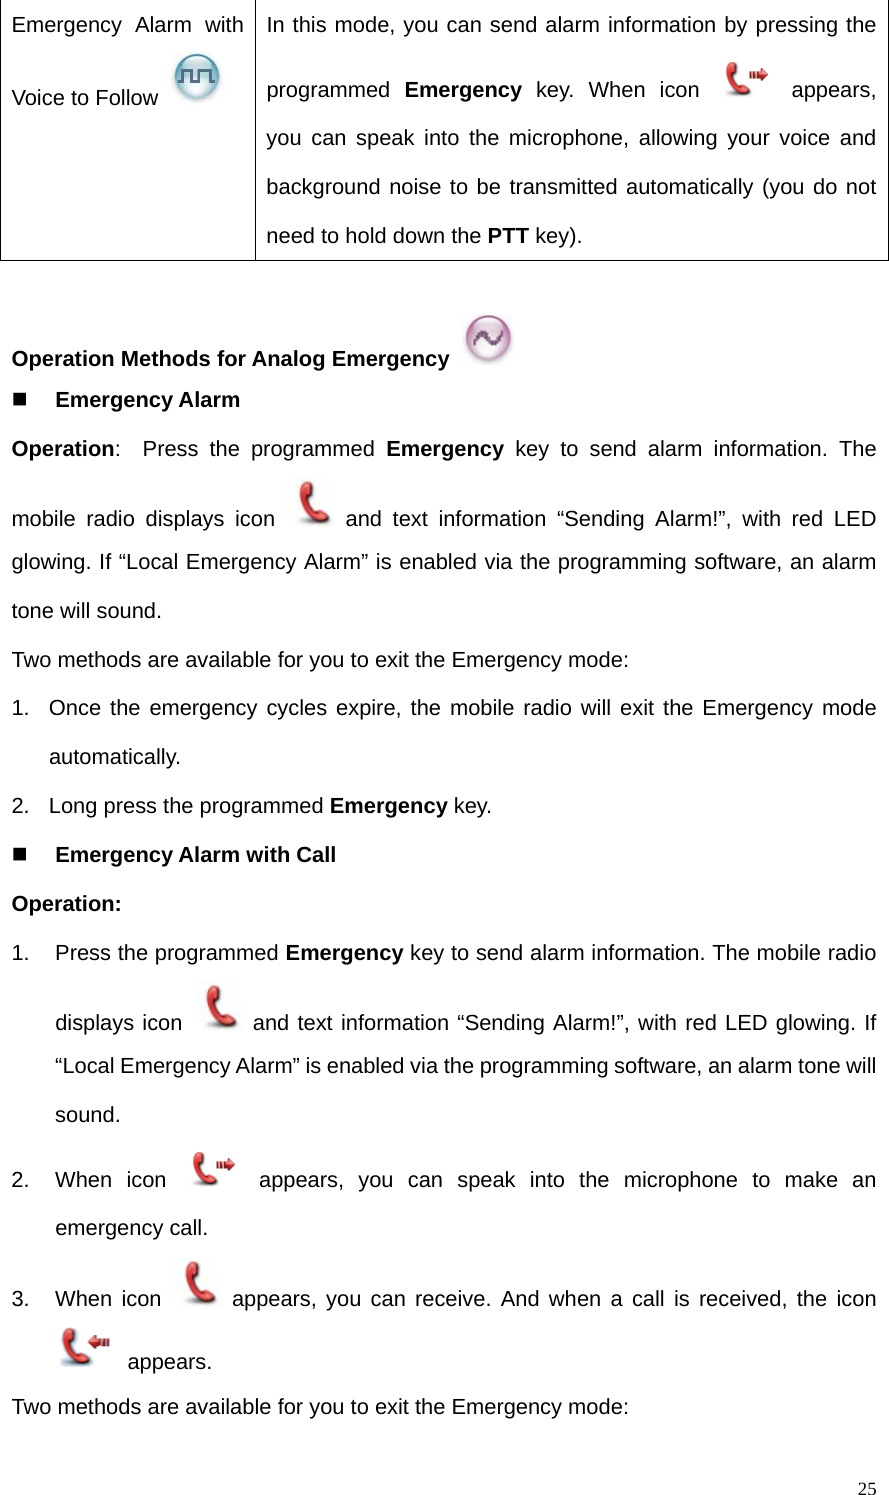   25Emergency Alarm with Voice to Follow   In this mode, you can send alarm information by pressing the programmed  Emergency key. When icon   appears, you can speak into the microphone, allowing your voice and background noise to be transmitted automatically (you do not need to hold down the PTT key).  Operation Methods for Analog Emergency    Emergency Alarm Operation:  Press the programmed Emergency key to send alarm information. The mobile radio displays icon   and text information “Sending Alarm!”, with red LED glowing. If “Local Emergency Alarm” is enabled via the programming software, an alarm tone will sound. Two methods are available for you to exit the Emergency mode: 1.  Once the emergency cycles expire, the mobile radio will exit the Emergency mode automatically.  2.  Long press the programmed Emergency key.  Emergency Alarm with Call Operation:  1.  Press the programmed Emergency key to send alarm information. The mobile radio displays icon   and text information “Sending Alarm!”, with red LED glowing. If “Local Emergency Alarm” is enabled via the programming software, an alarm tone will sound. 2. When icon   appears, you can speak into the microphone to make an emergency call.   3. When icon   appears, you can receive. And when a call is received, the icon  appears. Two methods are available for you to exit the Emergency mode: 